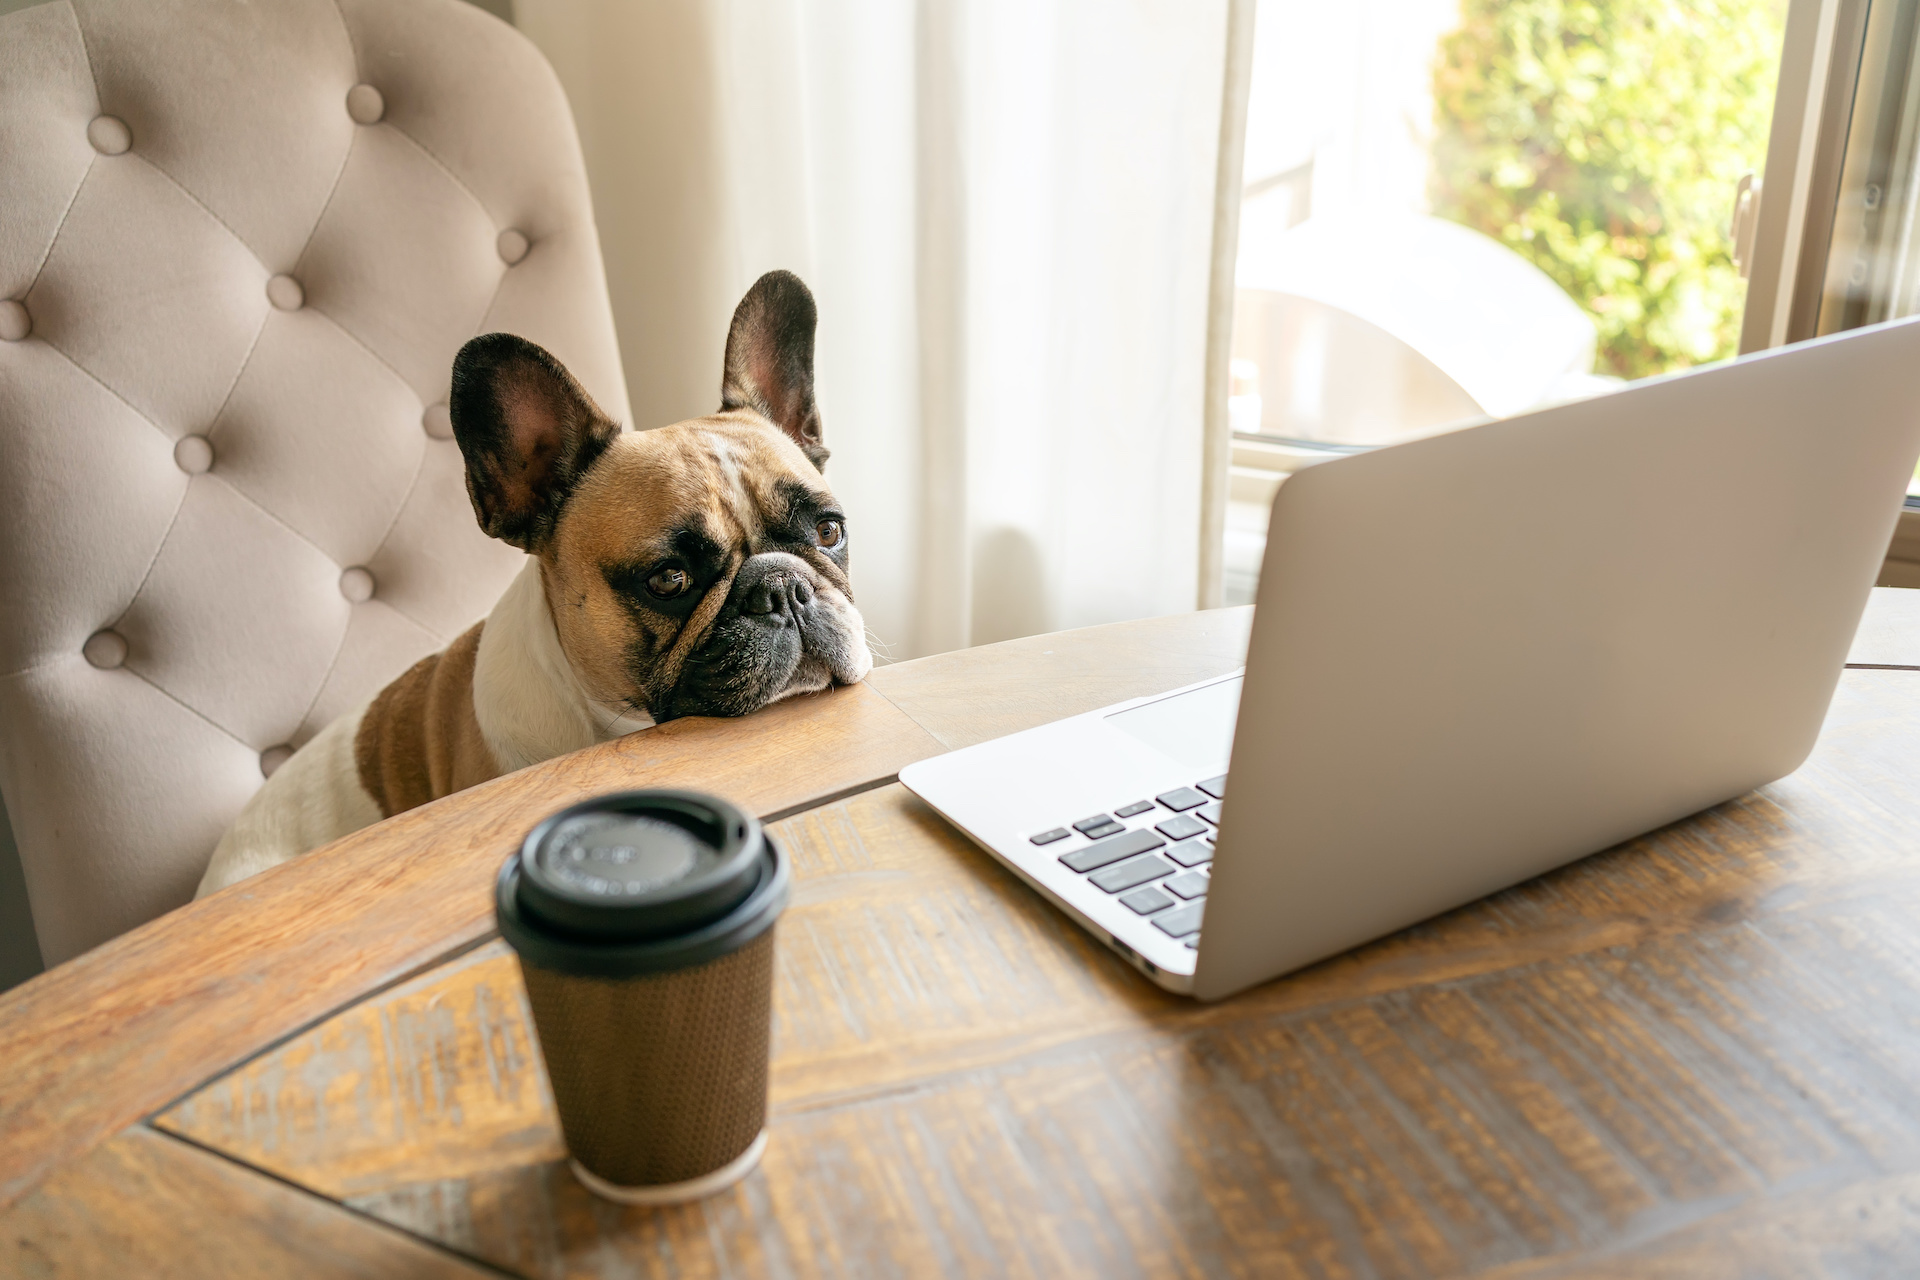 Work From Home Loneliness Is A Thing - Photo: Oksana, YFS Magazine, Adobe Stock